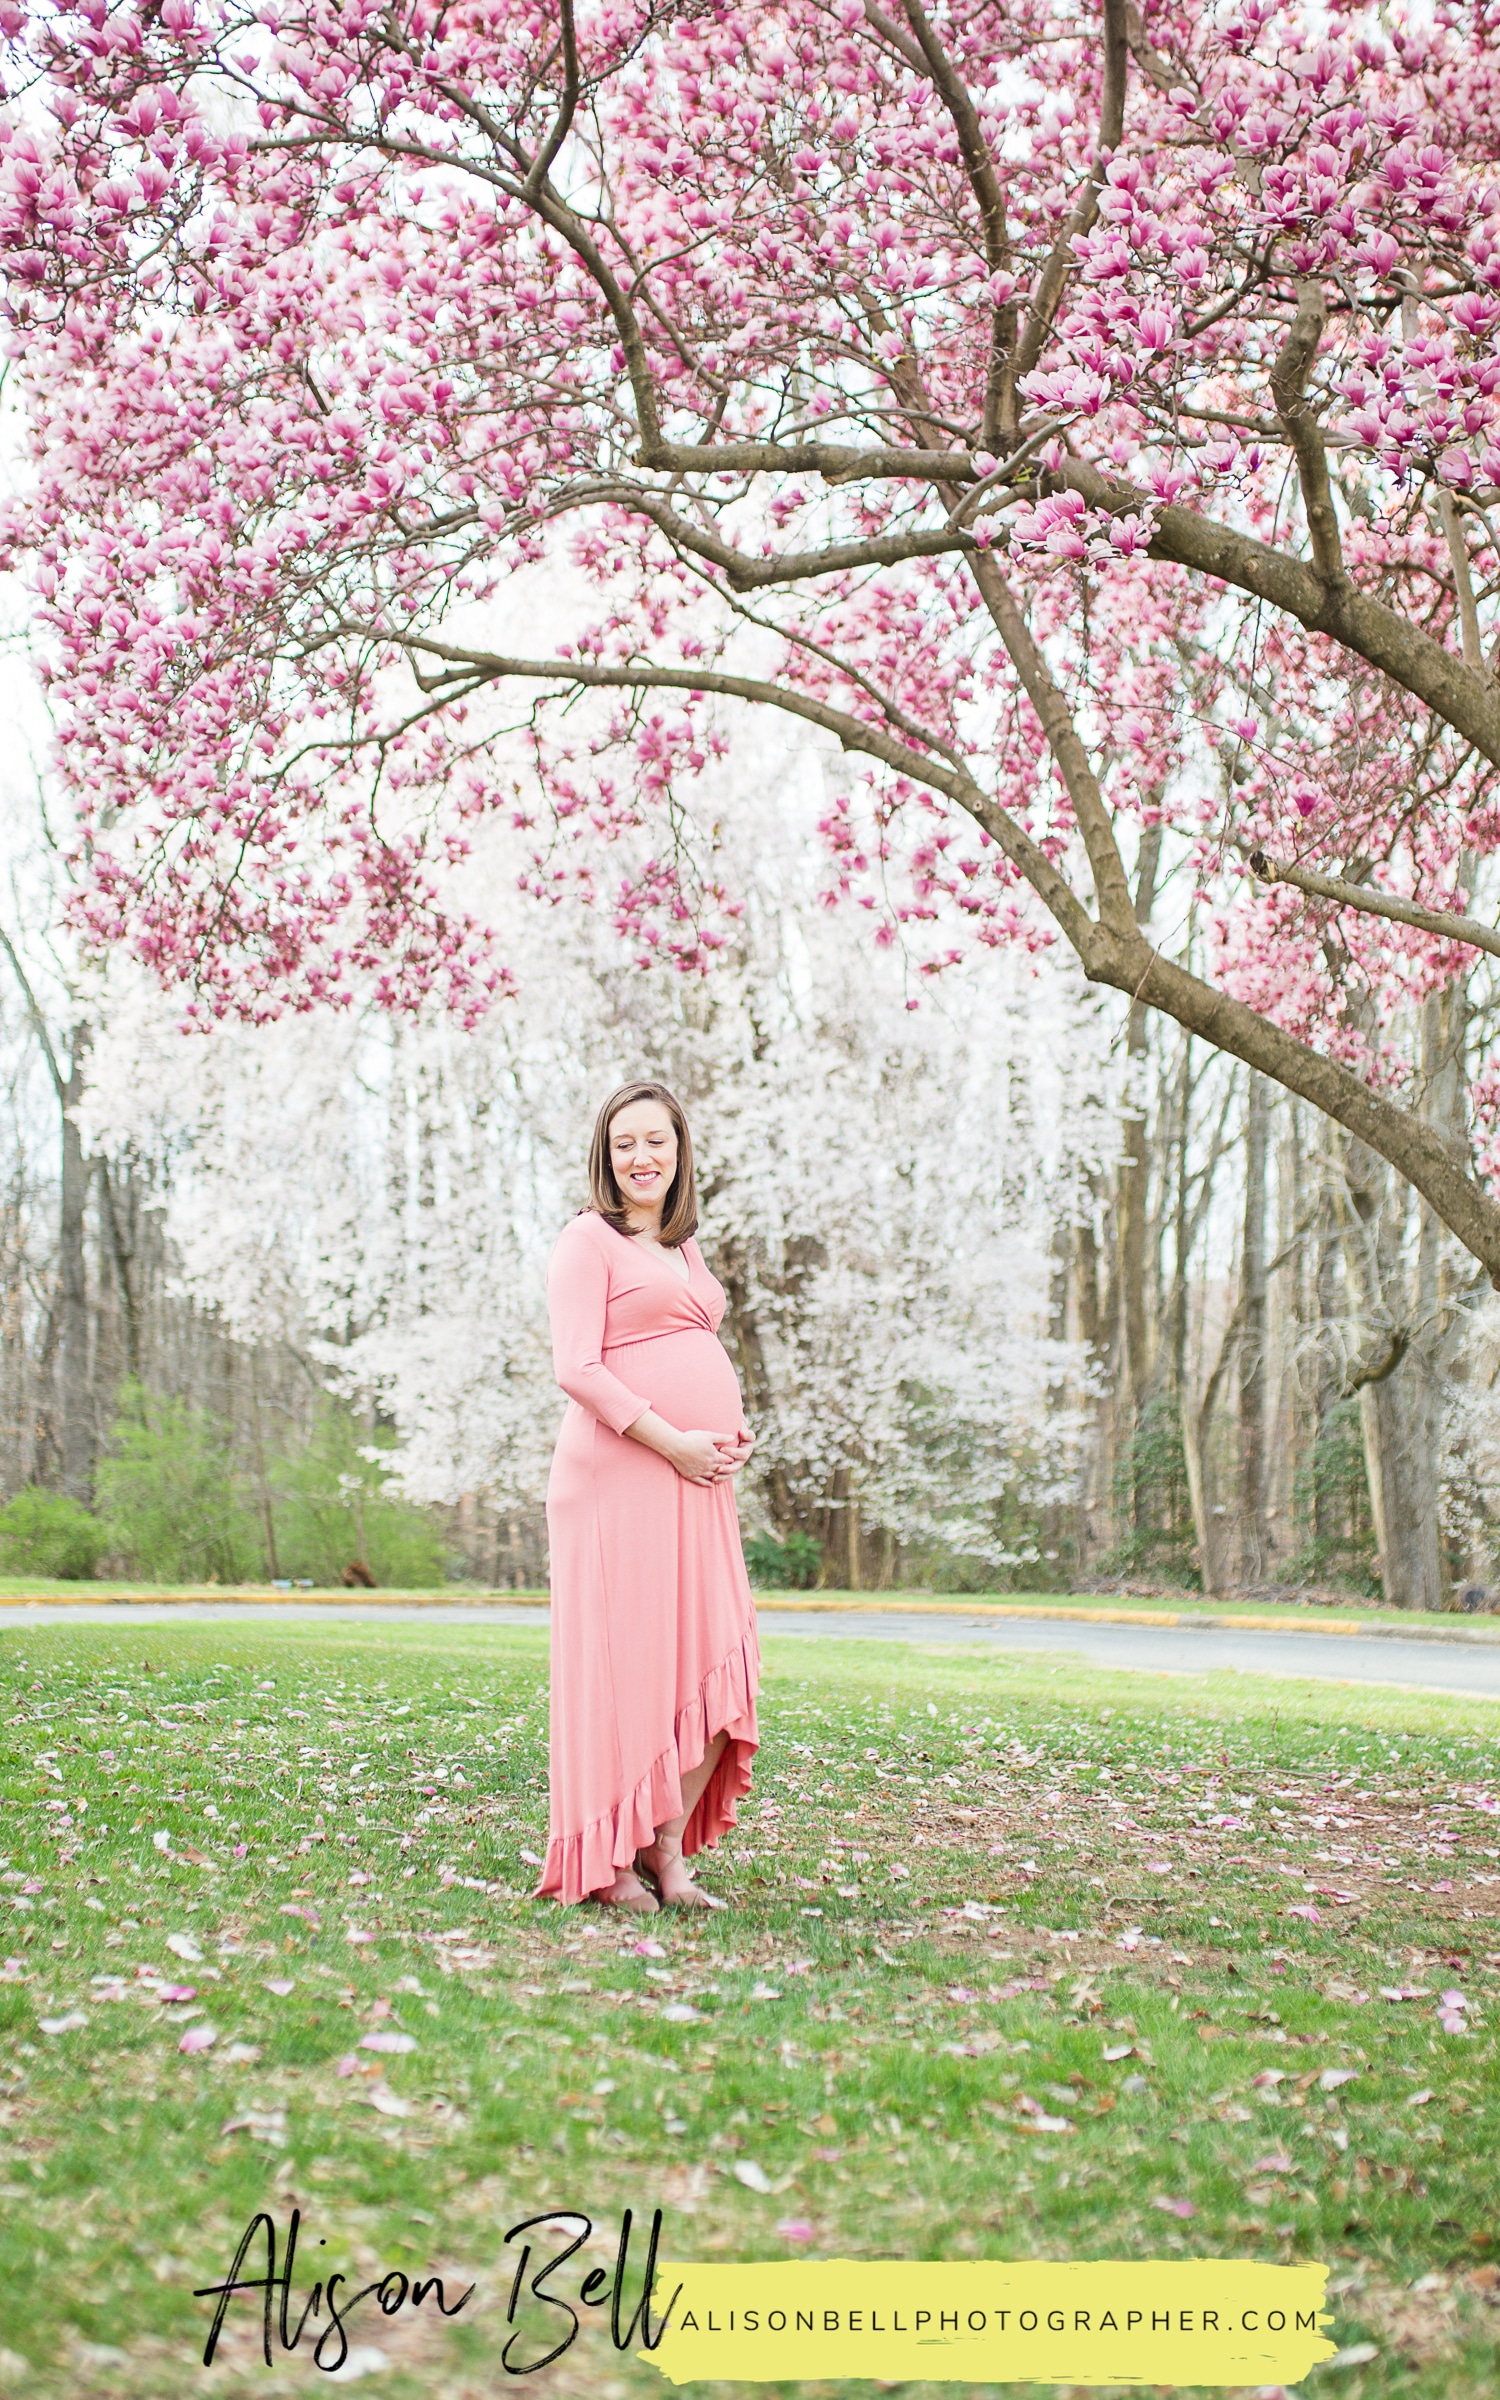 Half Price Maternity Mini Sessions on Marine Corps Base Quantico with Spring saucer magnolia blossoms by Alison Bell, Photographer. Alisonbellphotographer.com